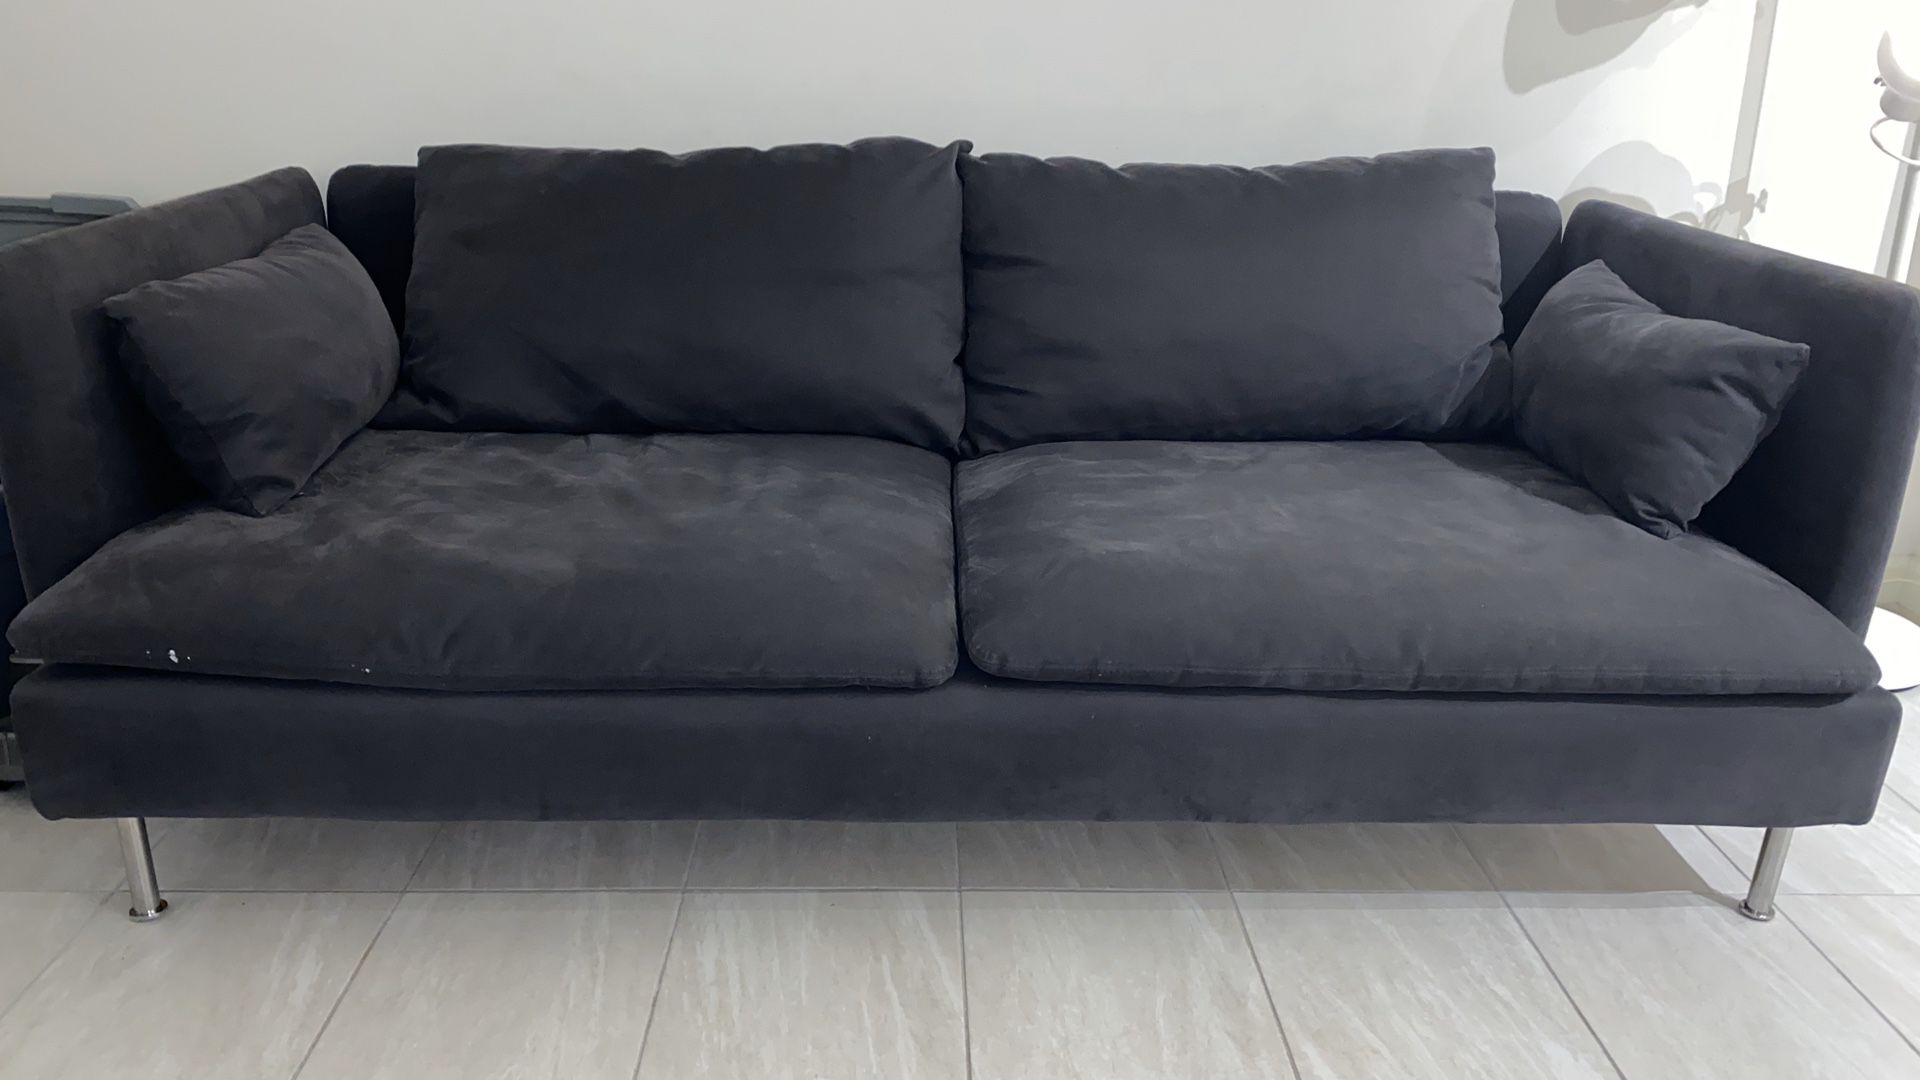 MUST GO Grey sofa couch Ikea